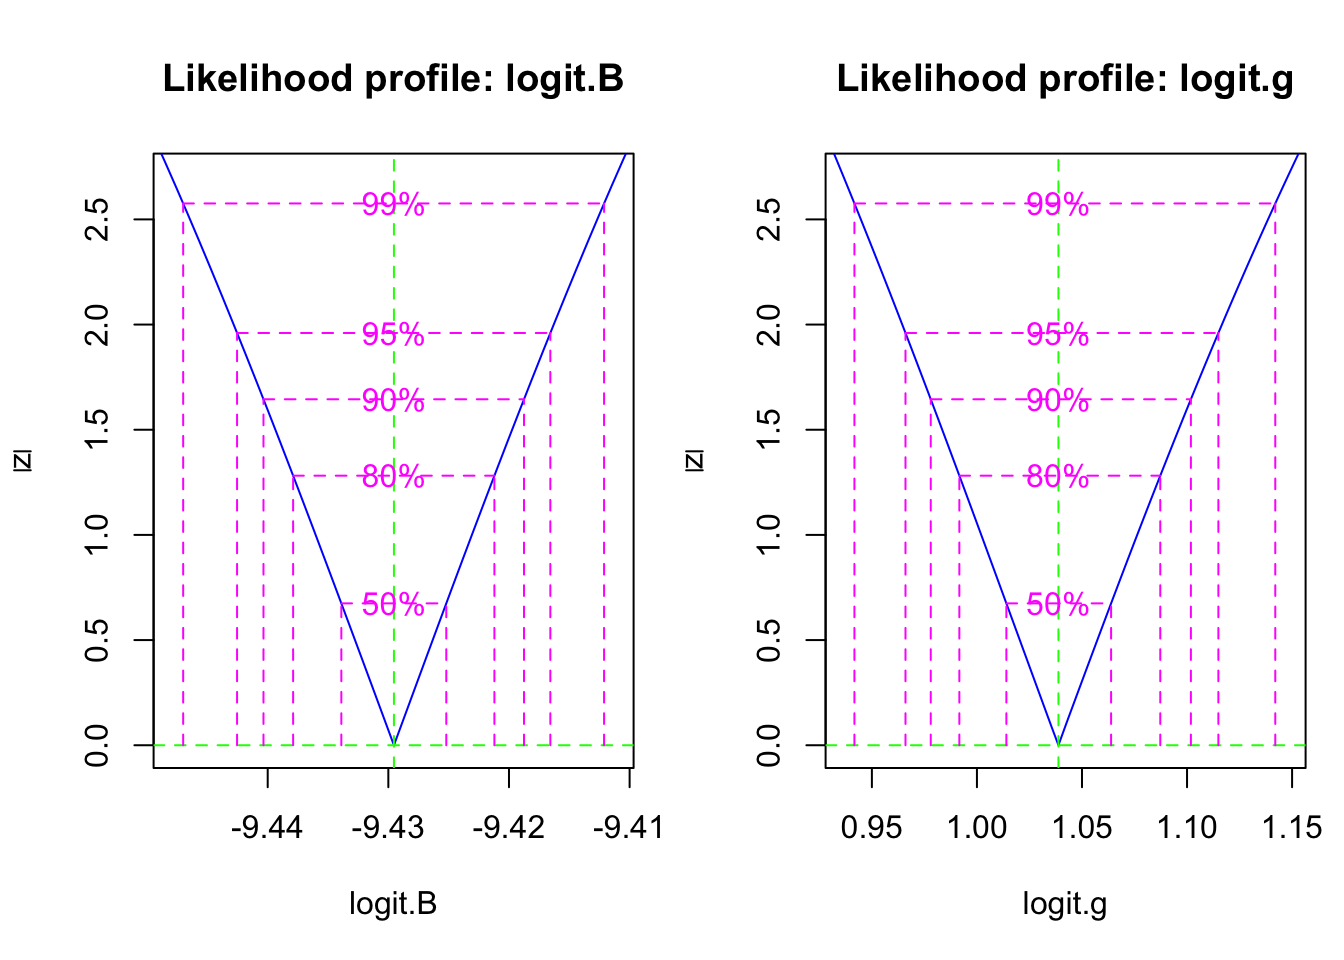 The likelihood profile plots show us the confidence intervals on transformed SIR model parameters.